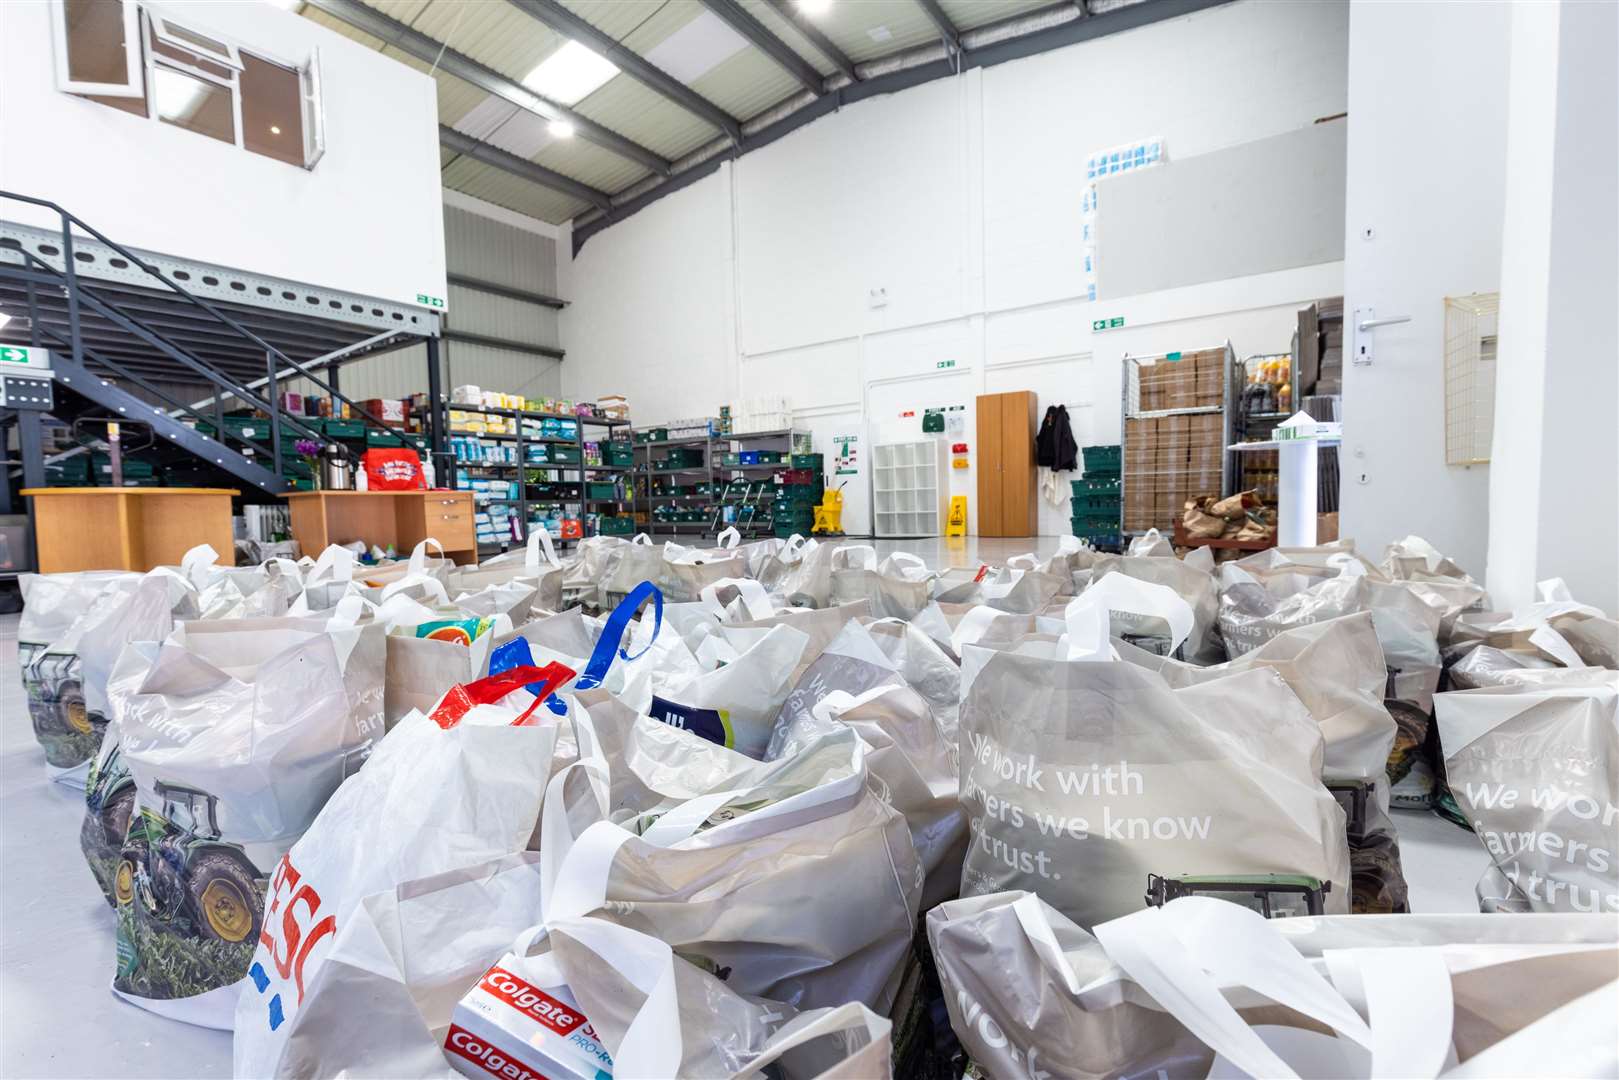 The Nourish Community Foodbank in Tunbridge Wells is struggling due to cost of living crisis. Picture: Alan Harbord